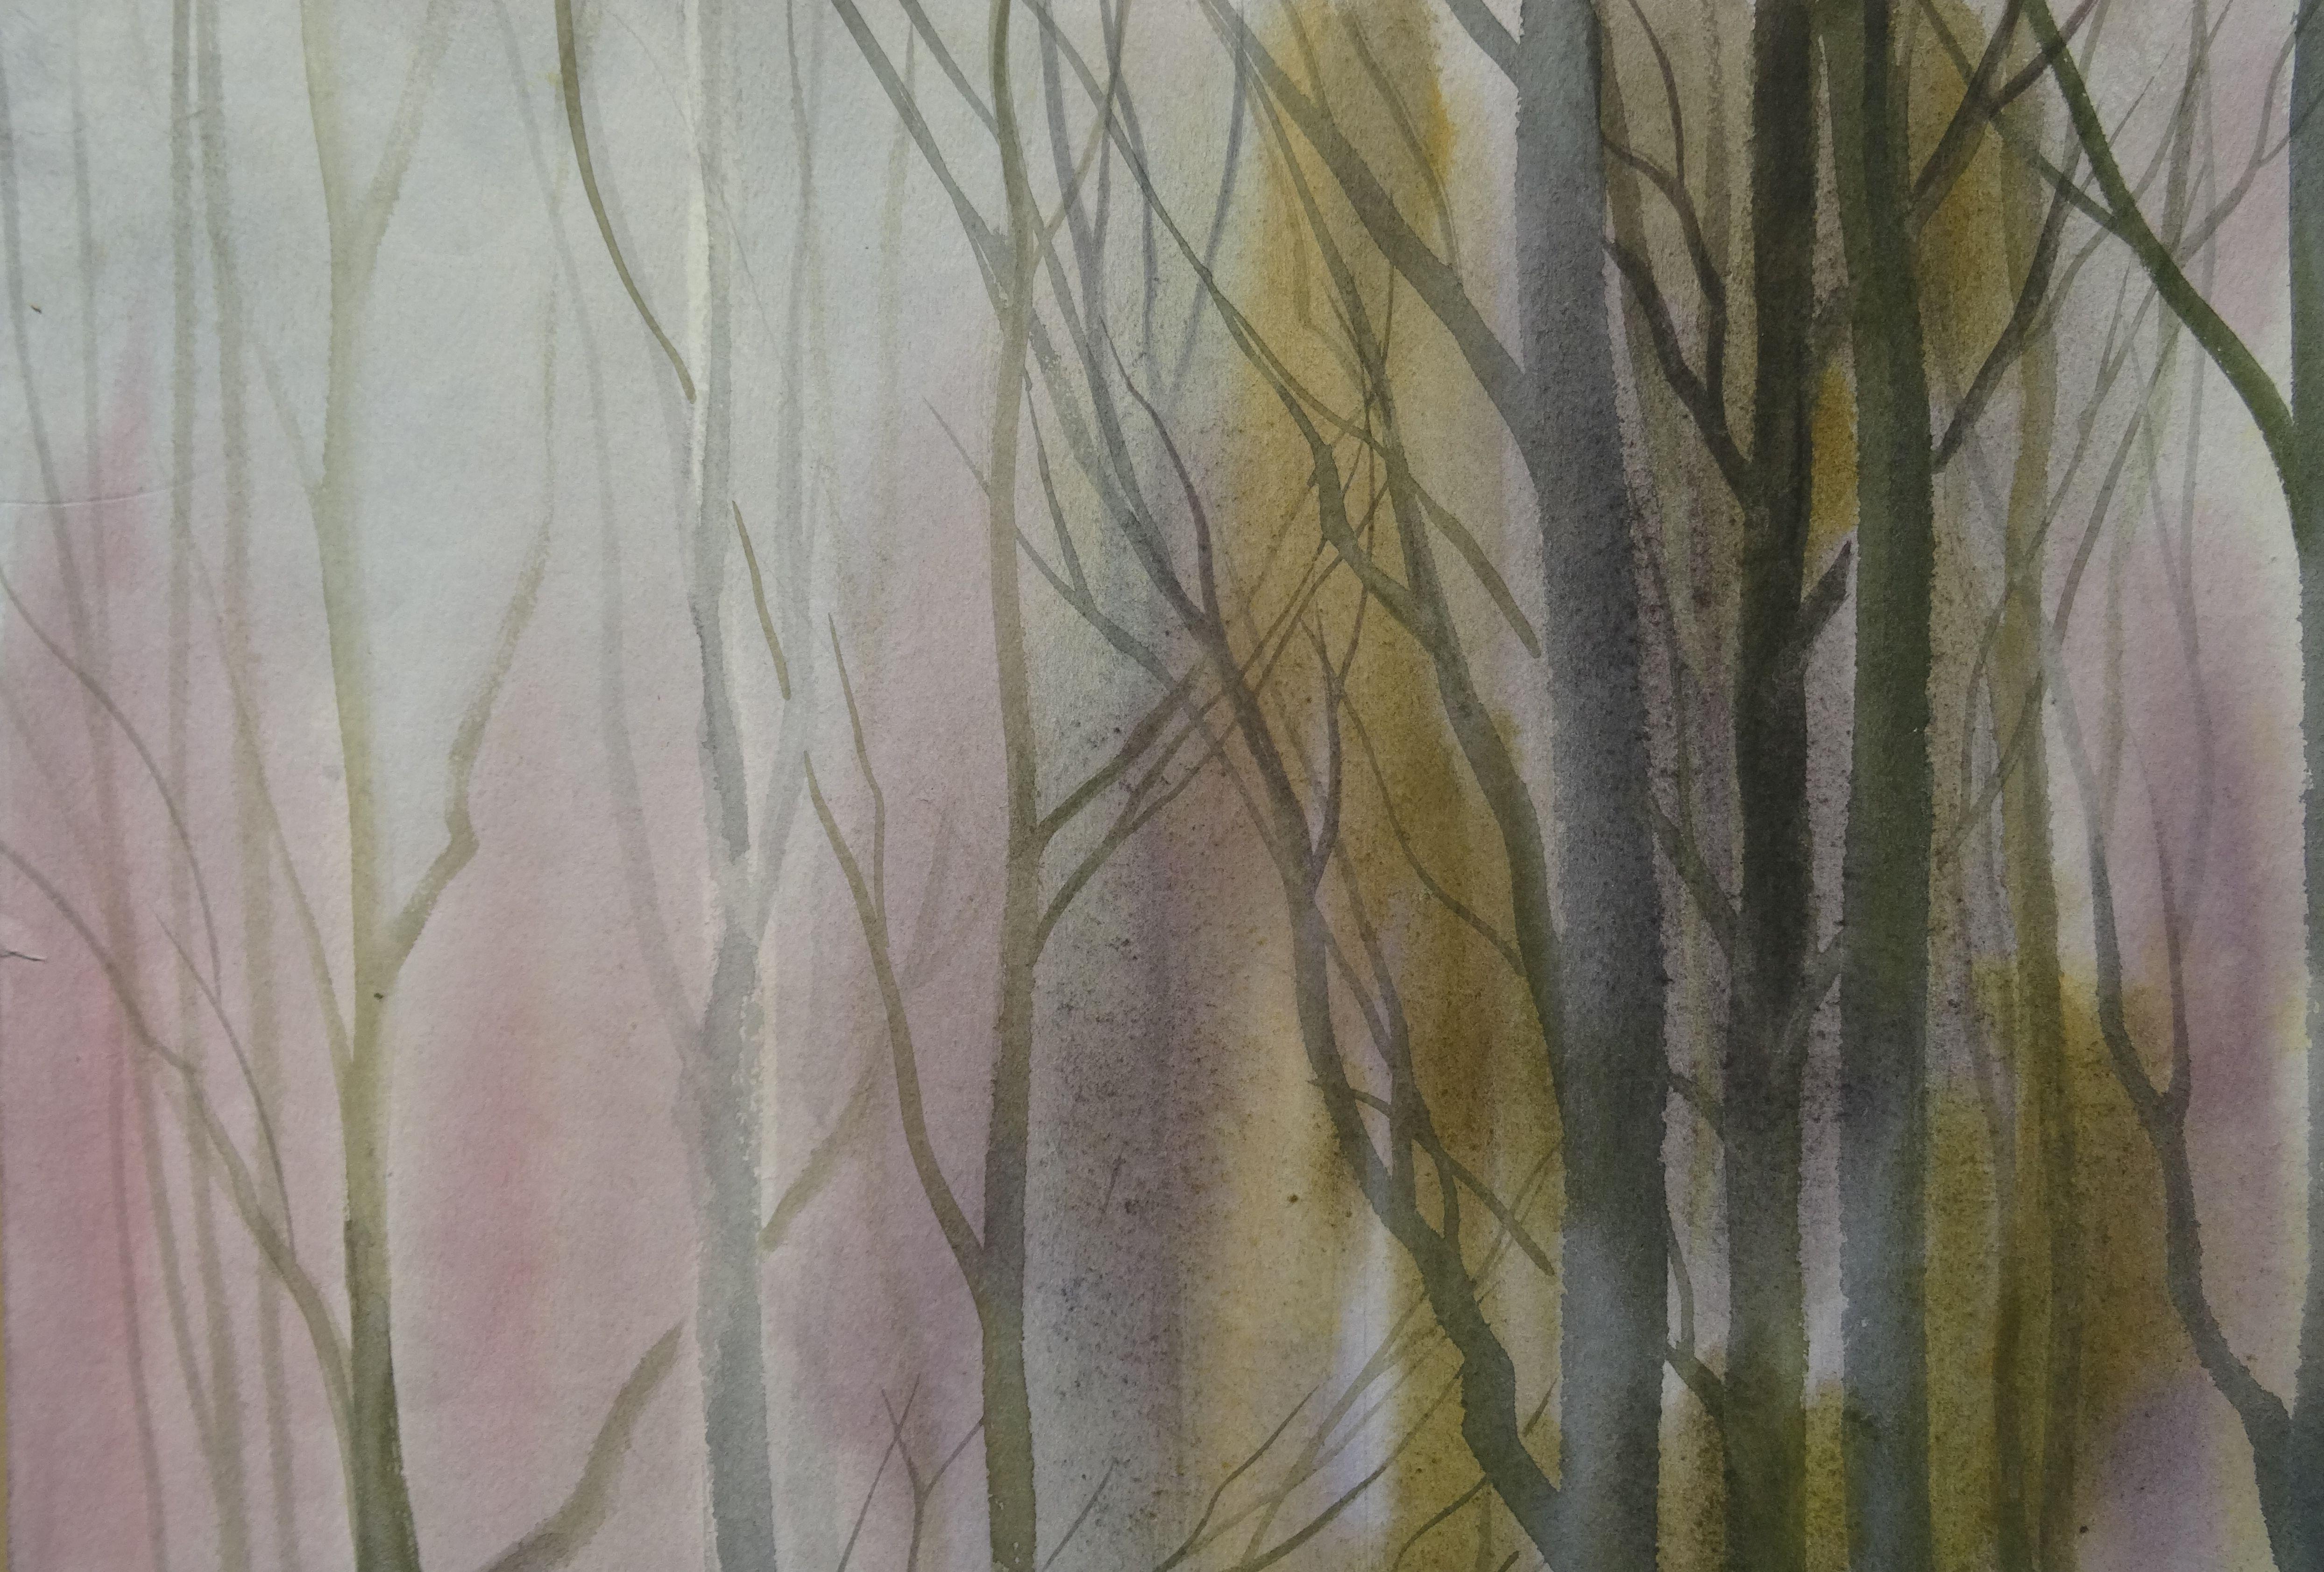 In early spring. Paper, watercolor, 59x69 cm
Landscape with trees in earth colors

Zigmunds Šņore was born in 1942 in Latvia.  His works has been exhibited since 1969 and are held in private collections in Latvia, USA, Sweden, Australia and Germany.